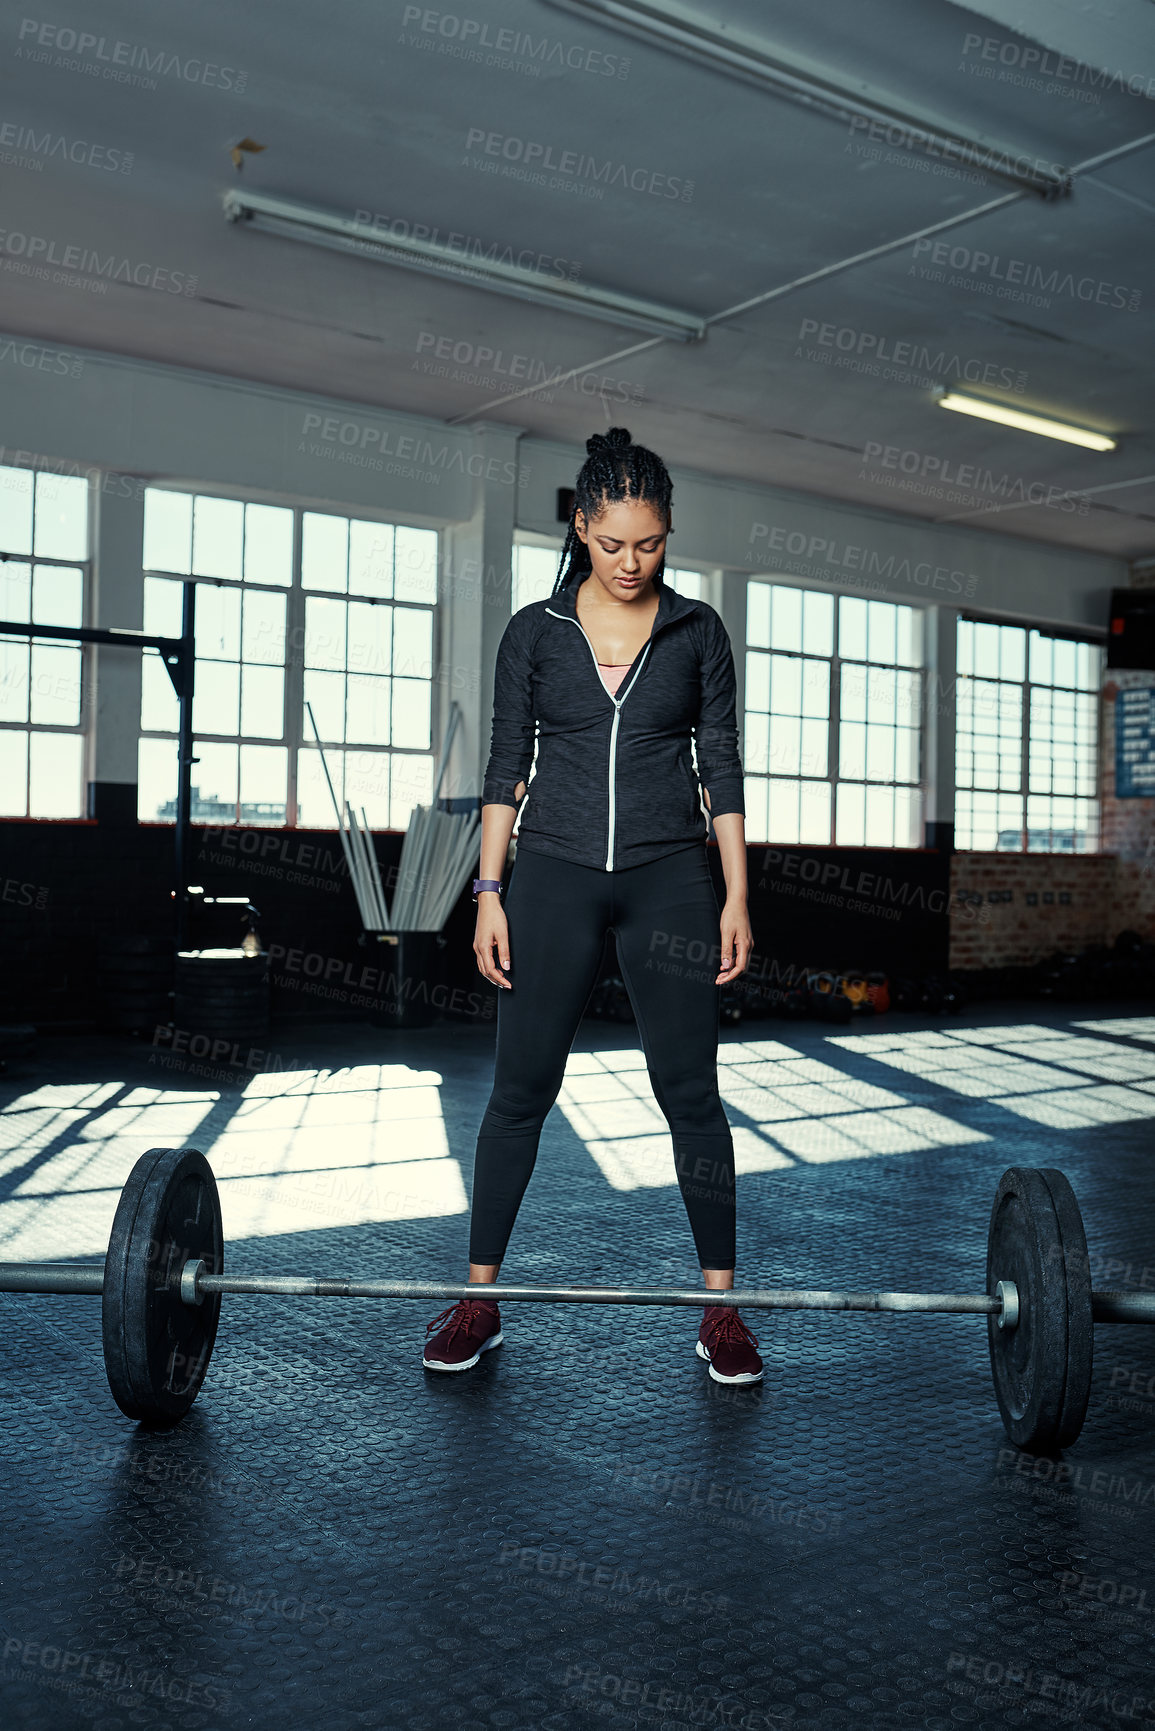 Buy stock photo Shot of a young woman getting ready to lift weights in a gym